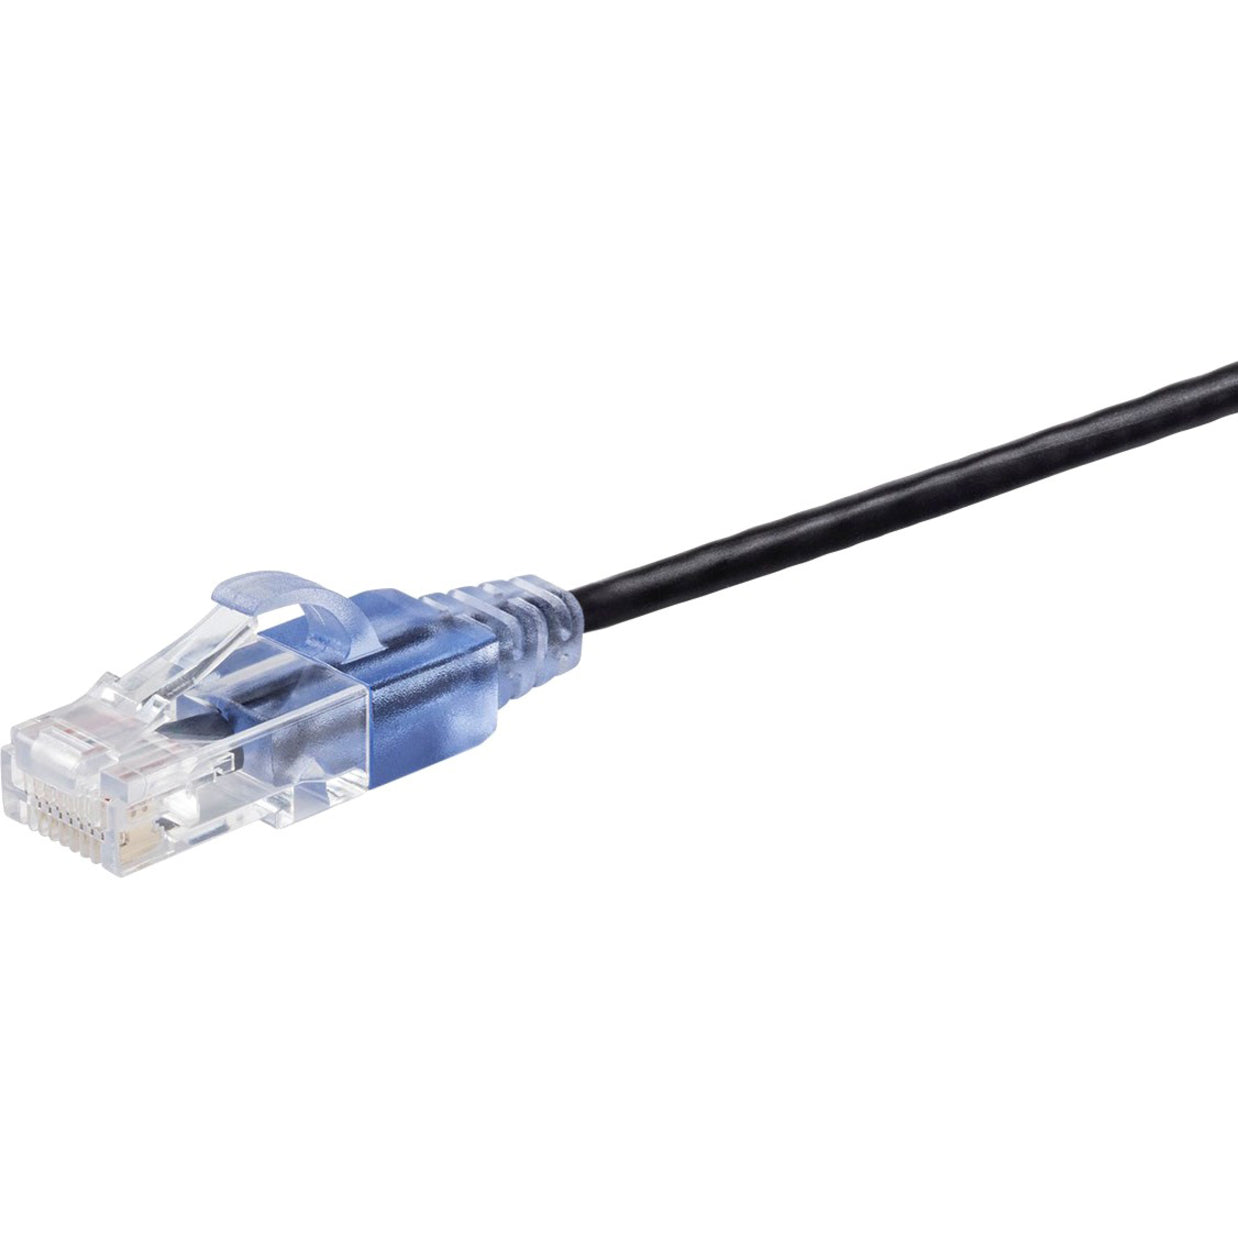 Monoprice 15153 SlimRun Cat6A Ethernet Network Patch Cable 3ft Black, 10-Pack